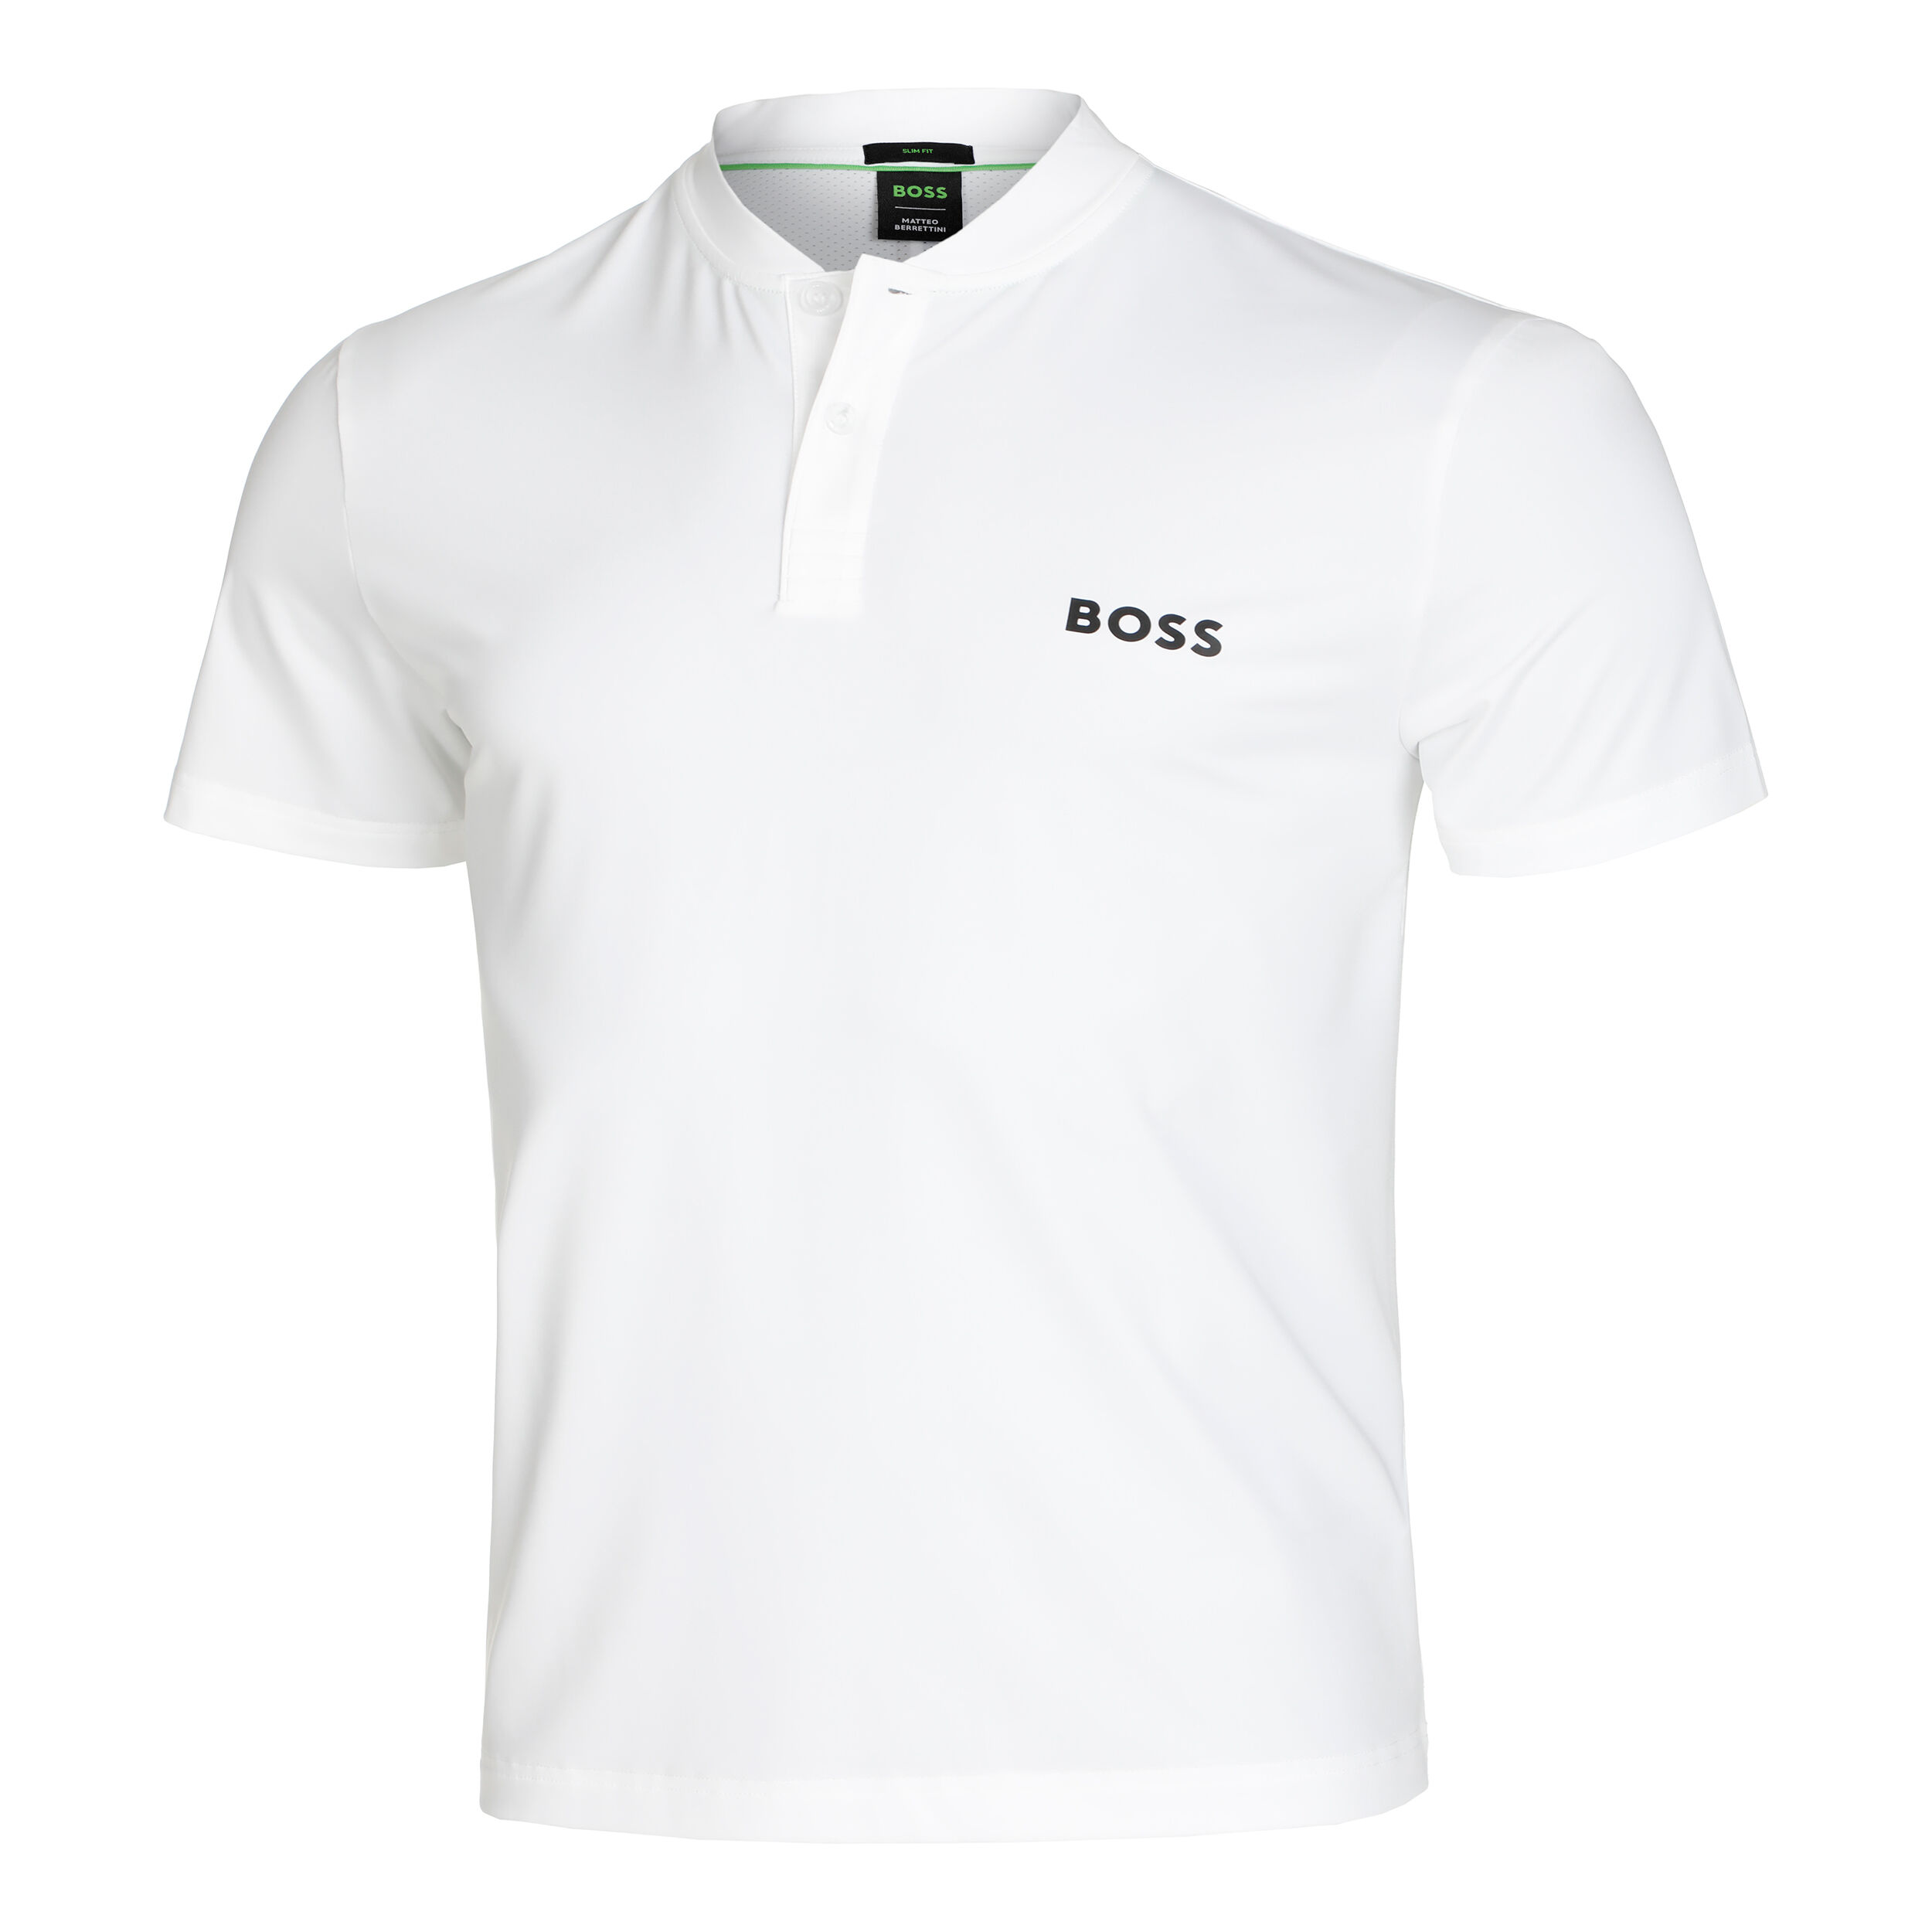 Buy Shirts online | Tennis-Point